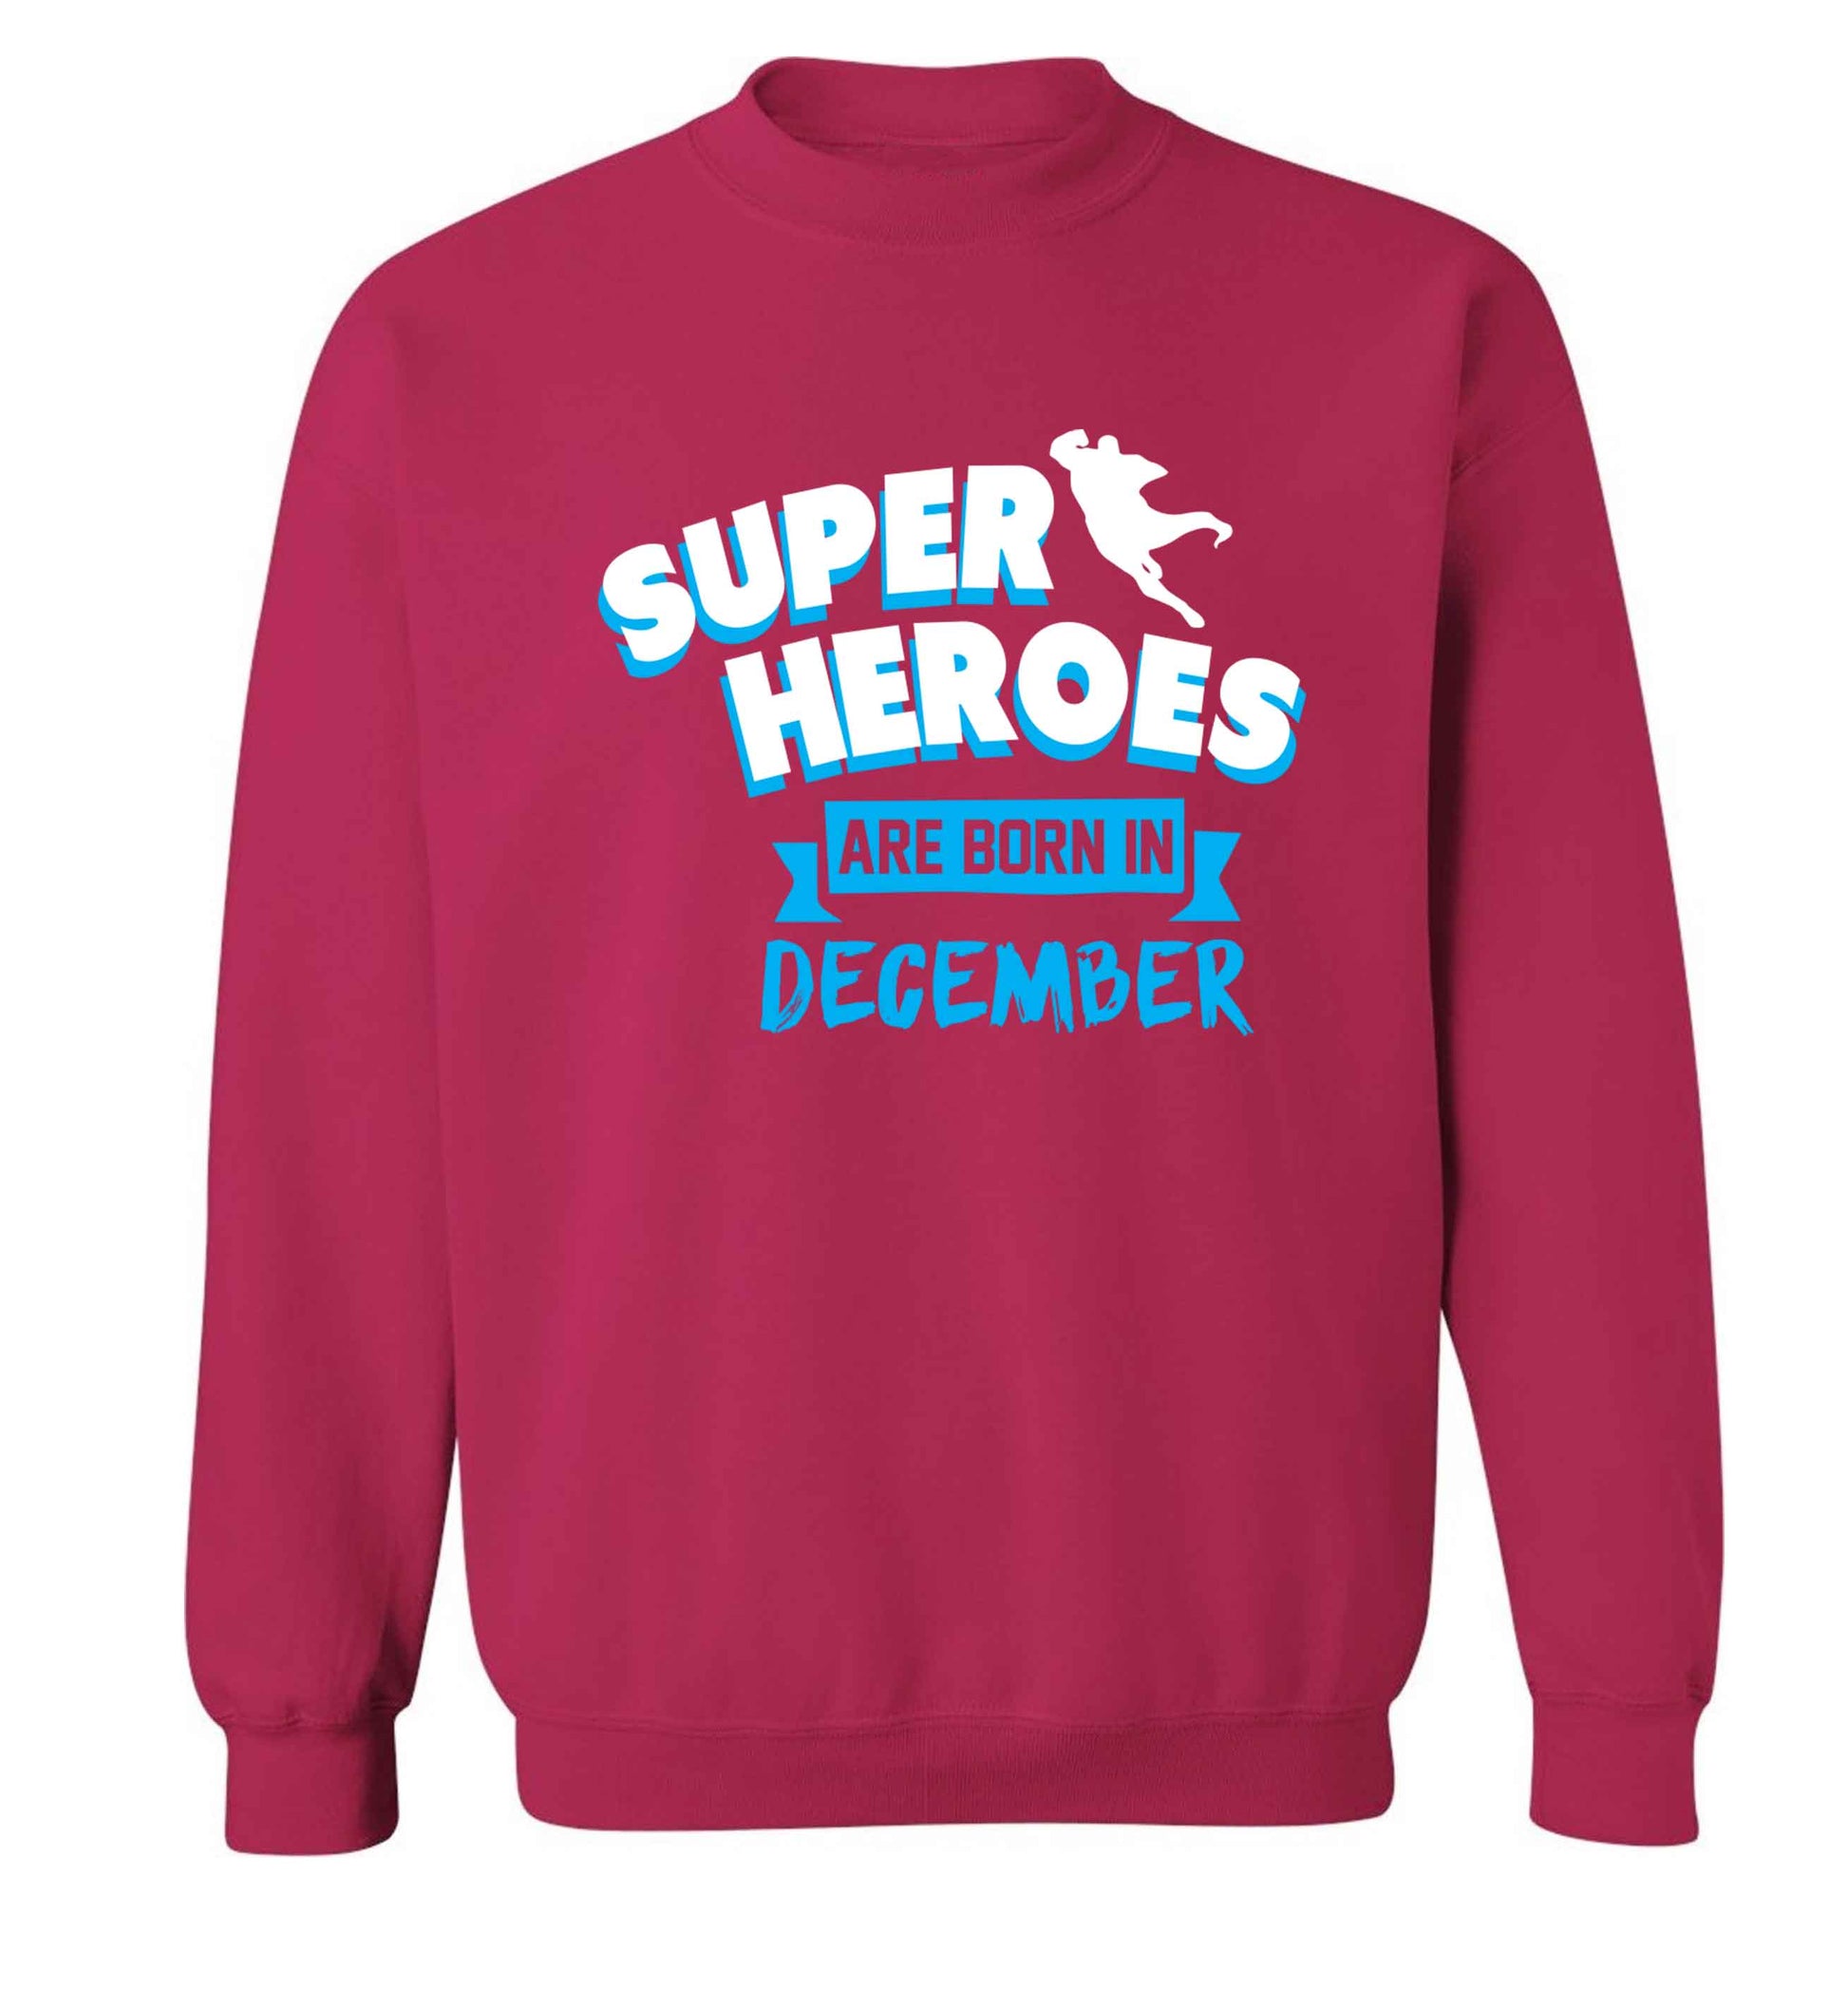 Superheroes are born in December Adult's unisex pink Sweater 2XL